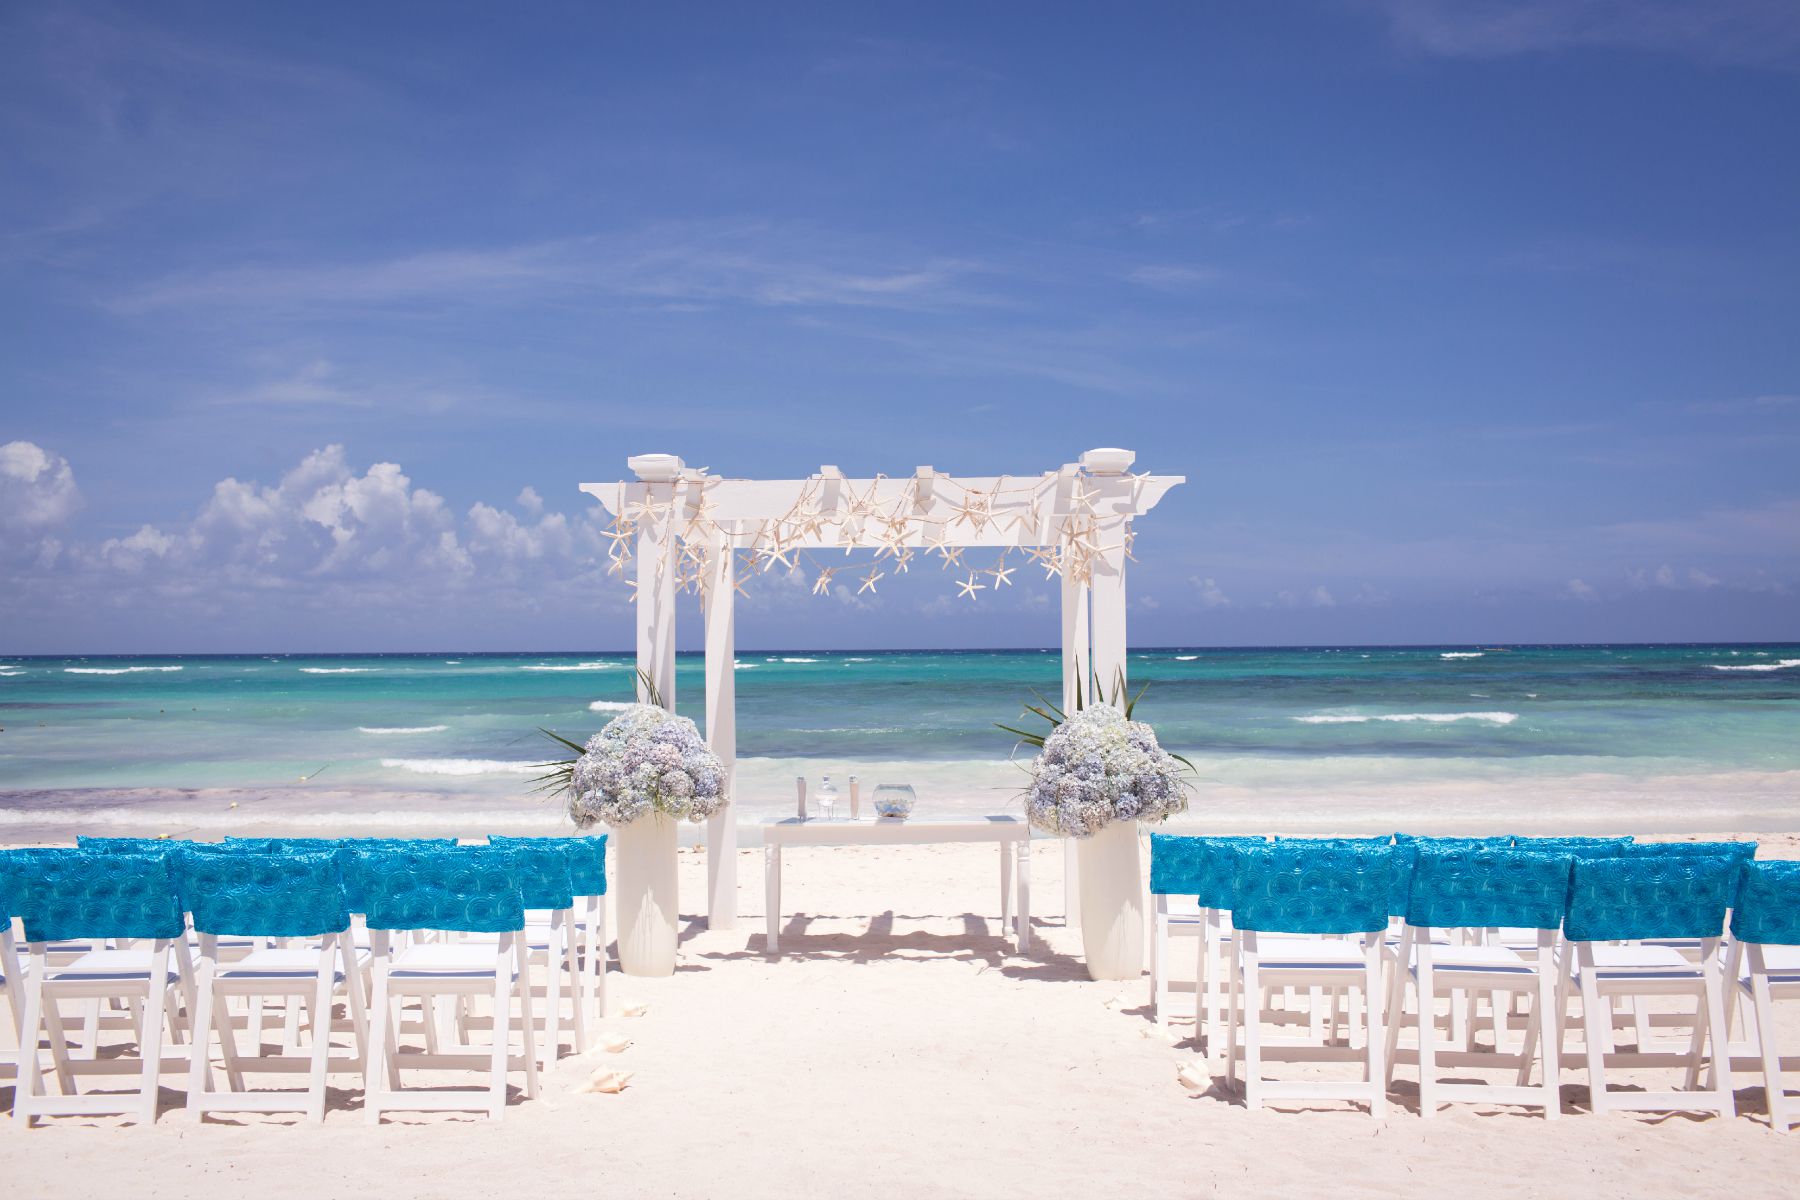 Beach wedding setup with blue-covered white chairs and arch decorated with sand dollars